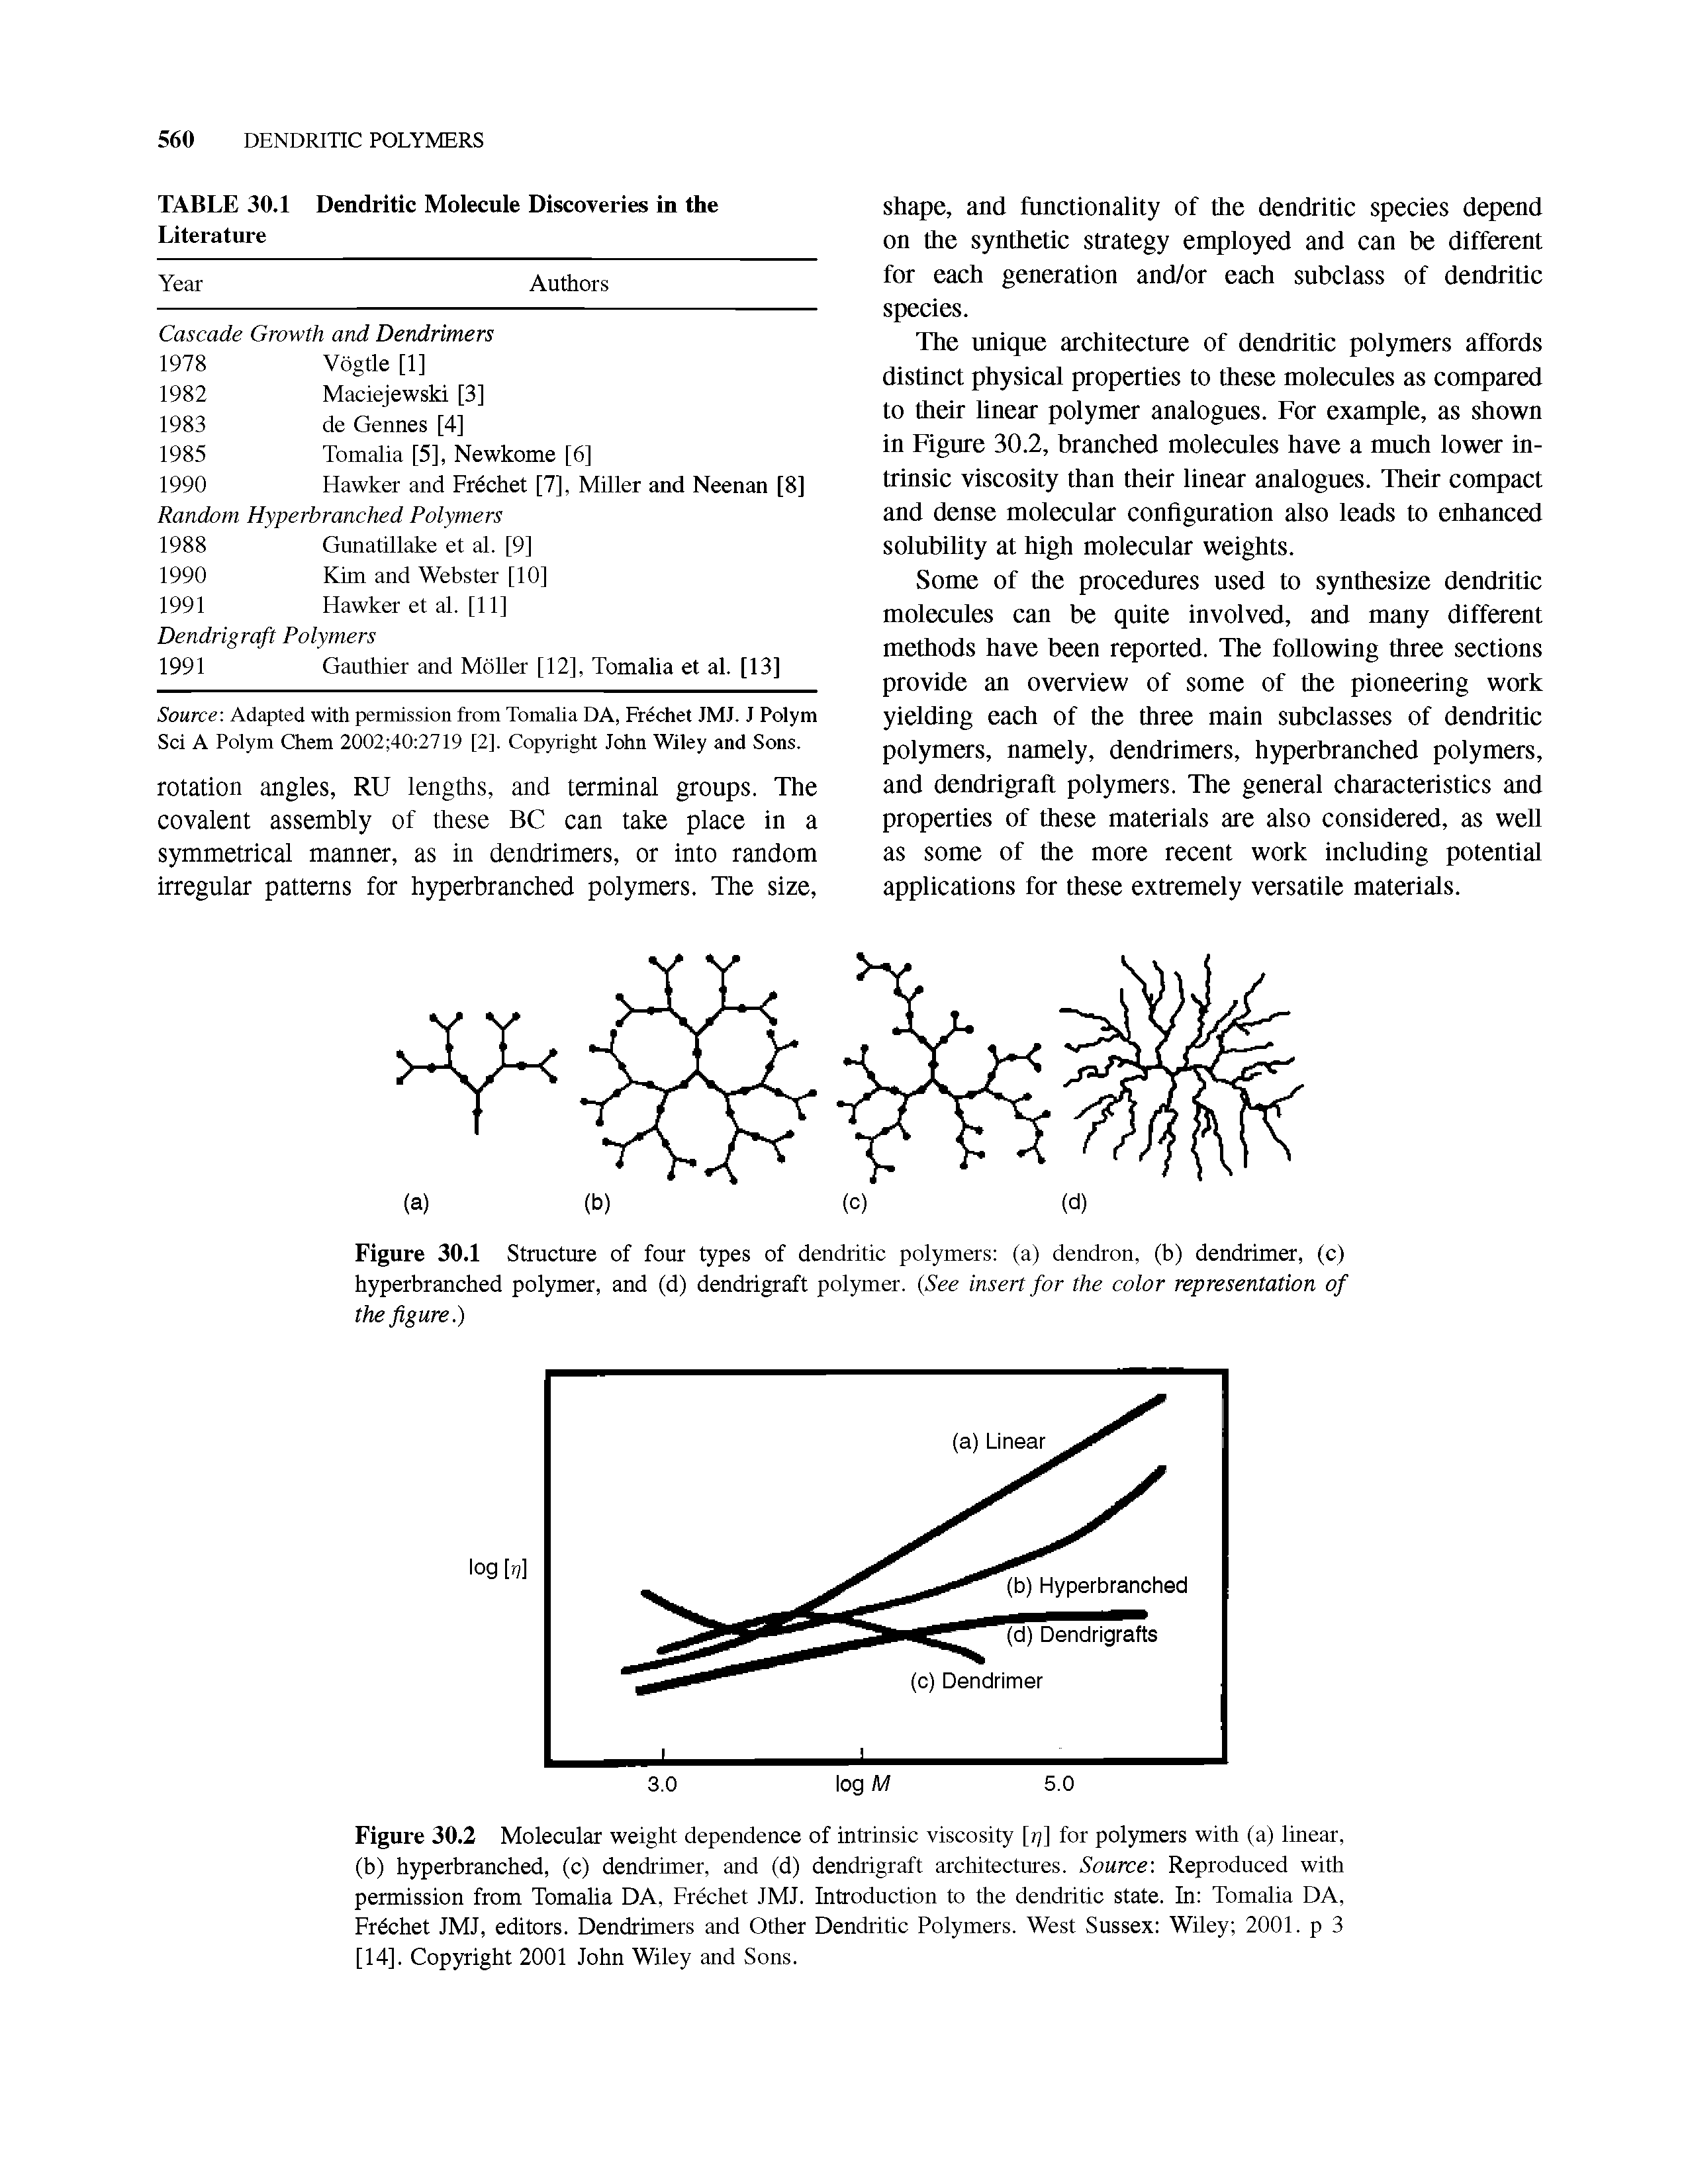 Figure 30.1 Structure of four types of dendritic polymers (a) dendron, (b) dendrimer, (c) hyperbranched polymer, and (d) dendrigraft polymer. (See insert for the color representation of the figure.)...